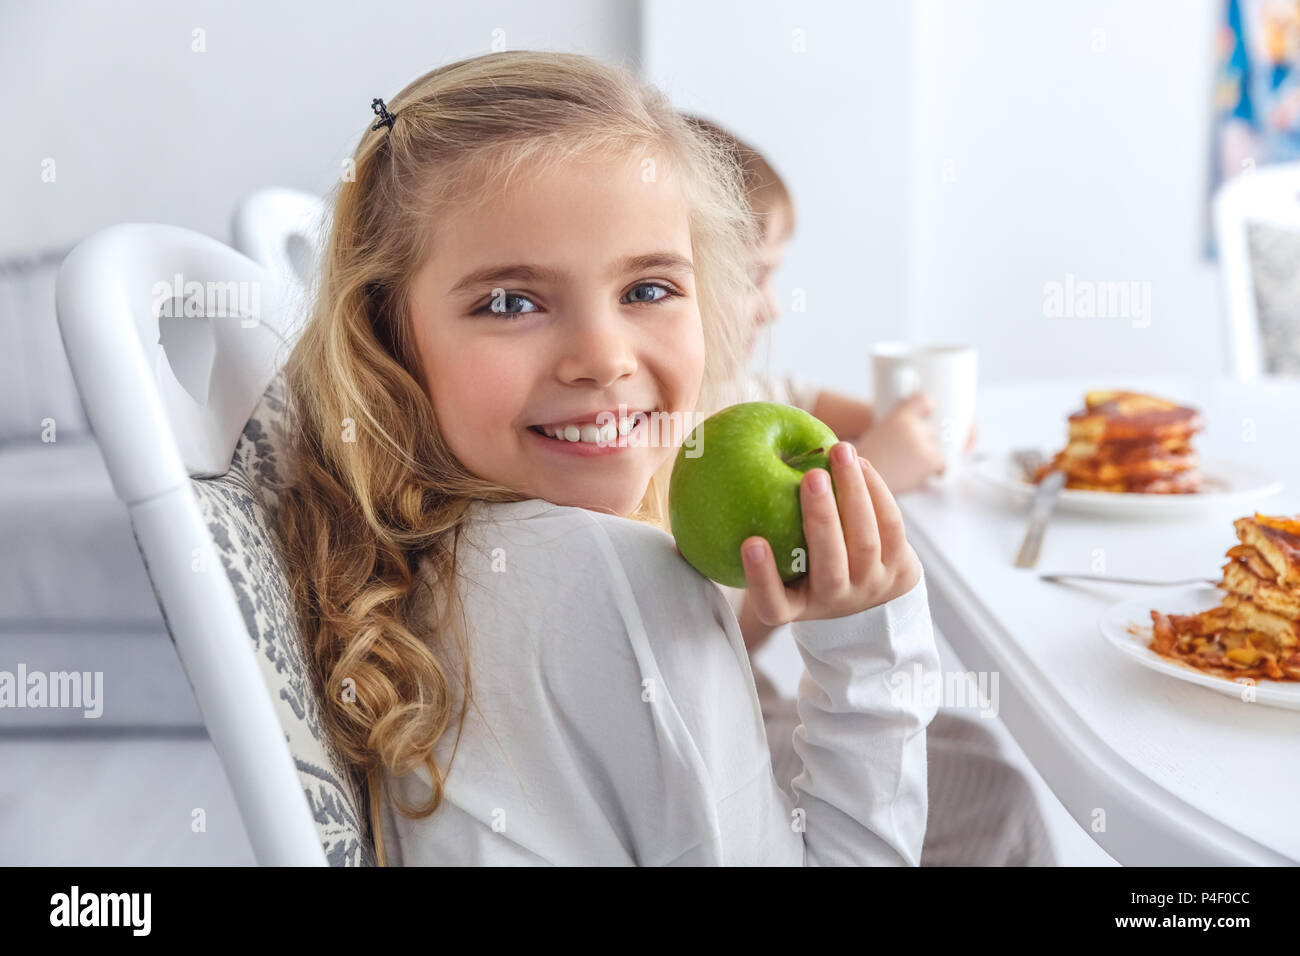 adorable little child with green apple looking at camera while having breakfast with family Stock Photo